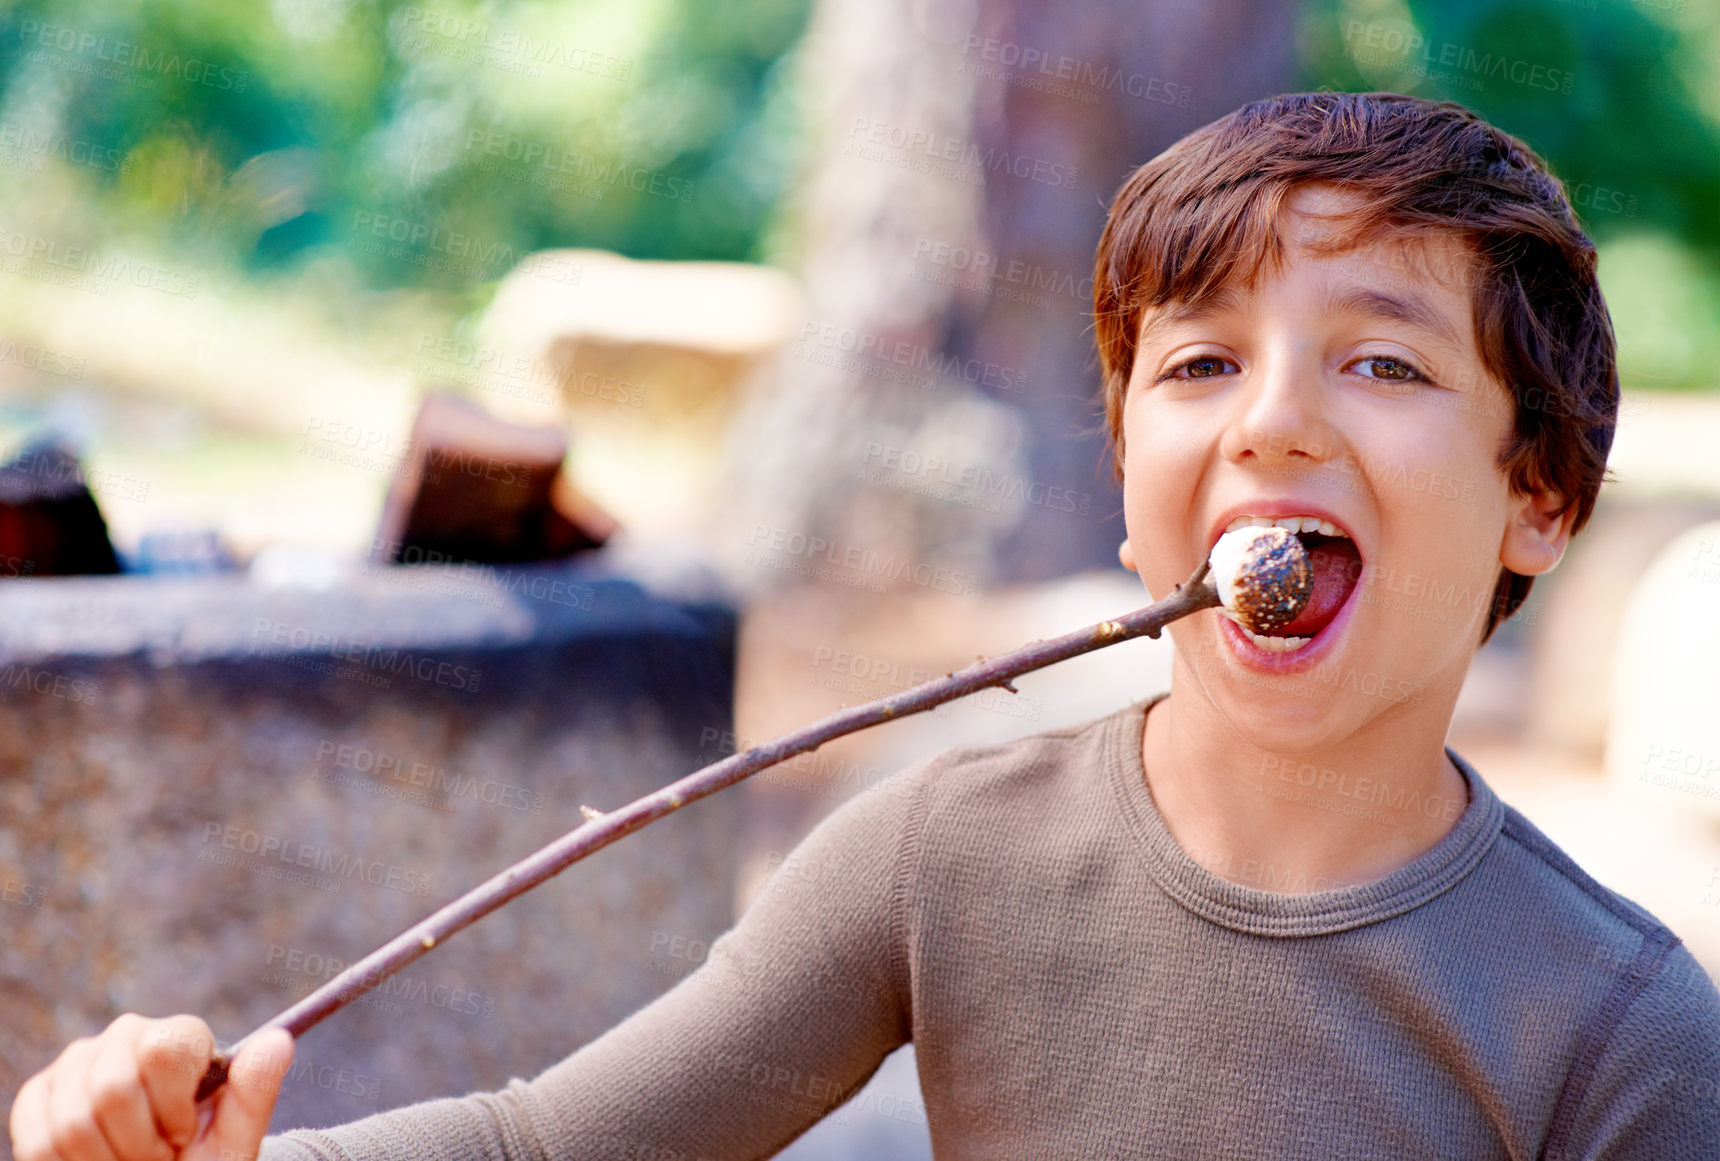 Buy stock photo Boy, camping or eating a marshmallow in portrait, hungry or fire roast candy in forest. Young child, summer break or smile on face for sugar snack, hiking or nature for holiday adventure or treat